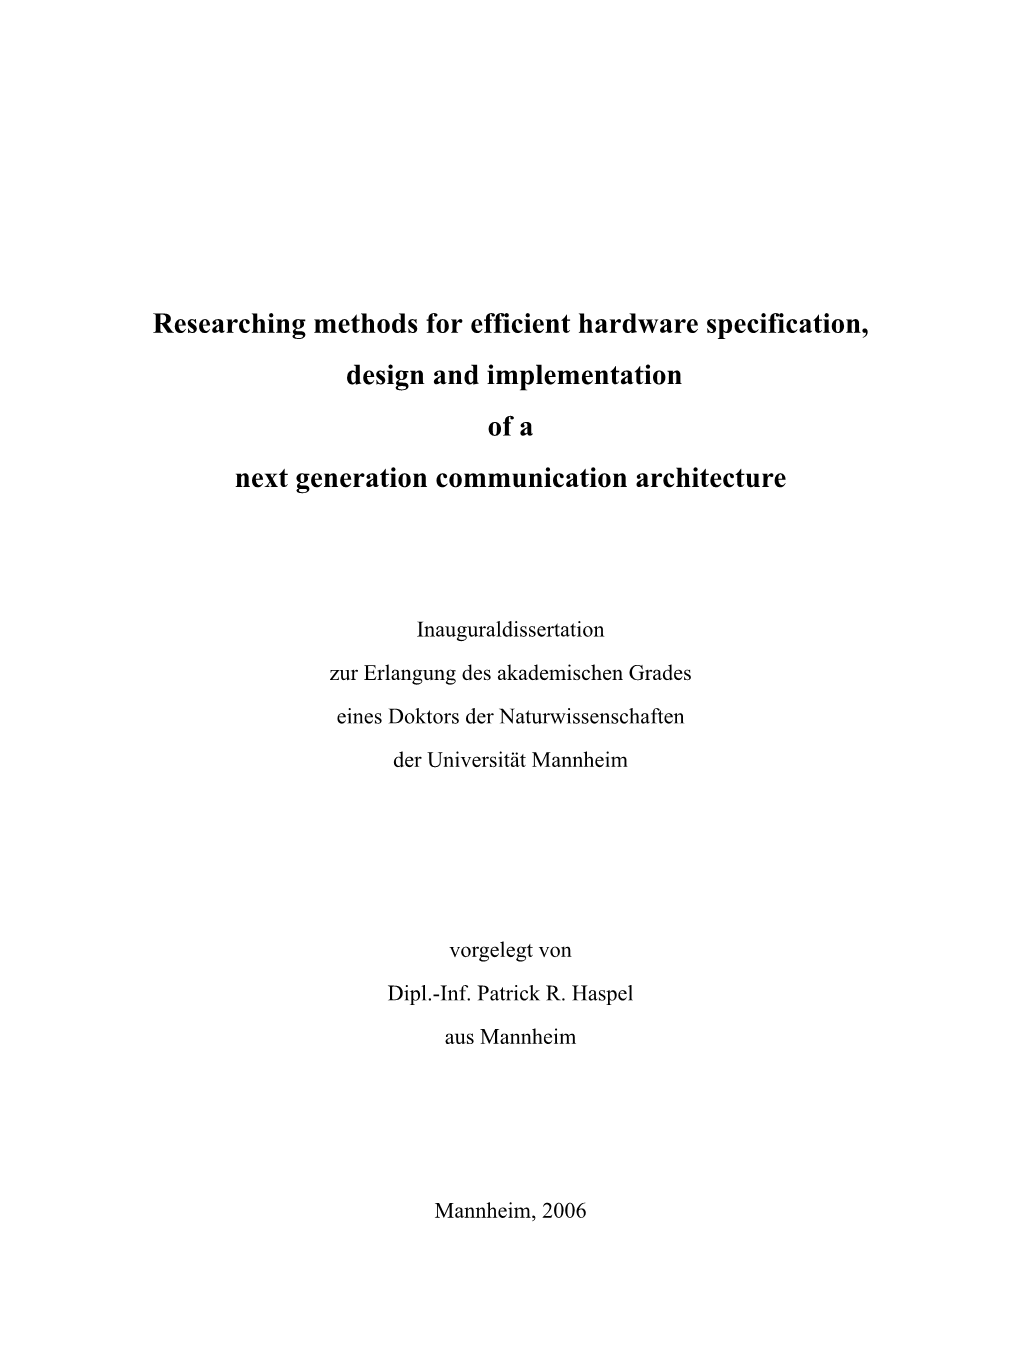 Researching Methods for Efficient Hardware Specification, Design and Implementation of a Next Generation Communication Architecture